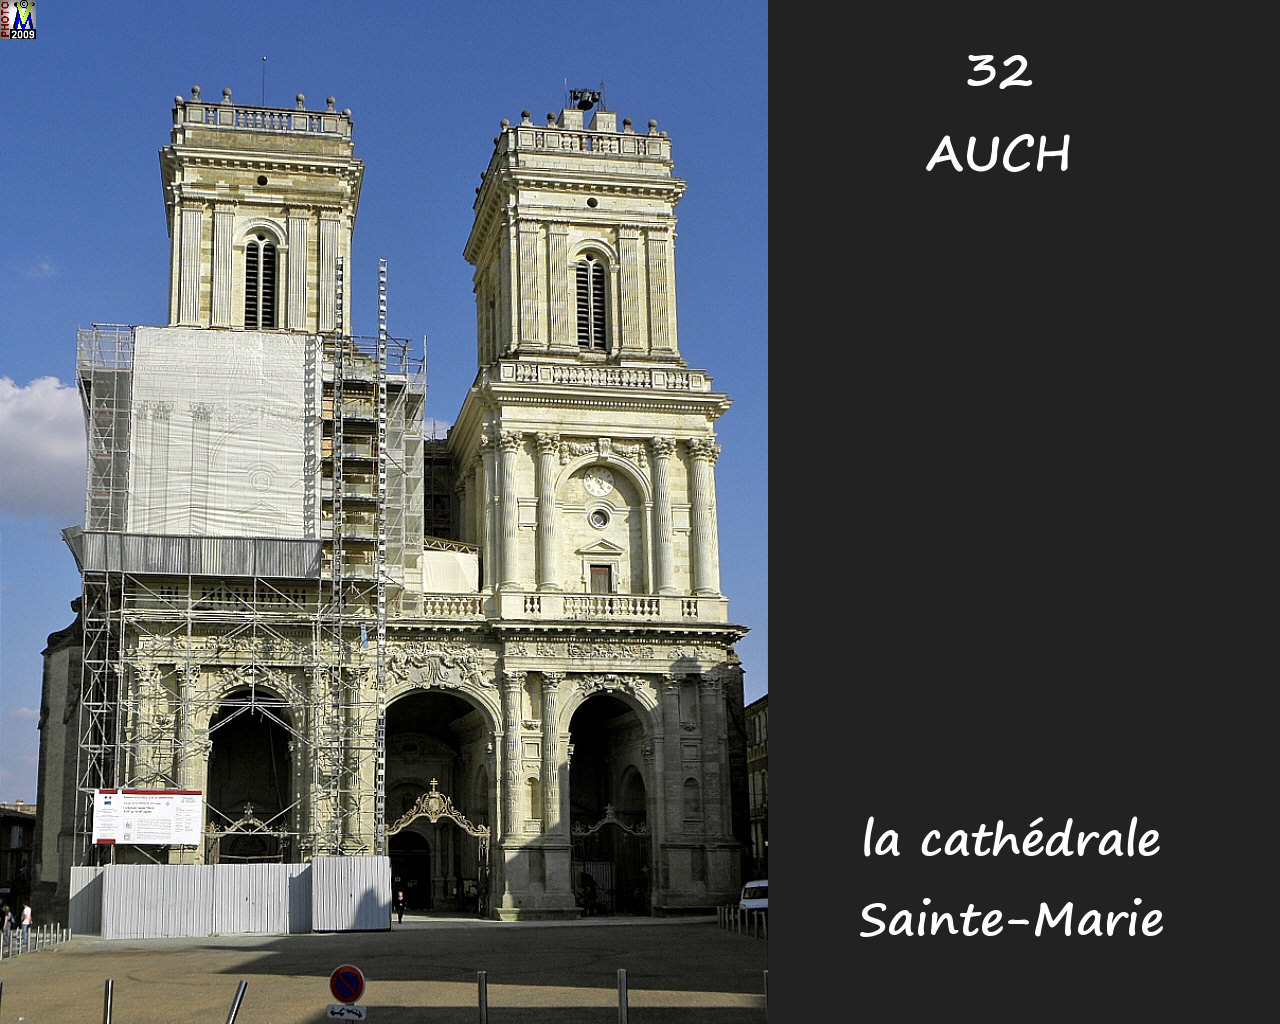 32AUCH_cathedrale_102.jpg